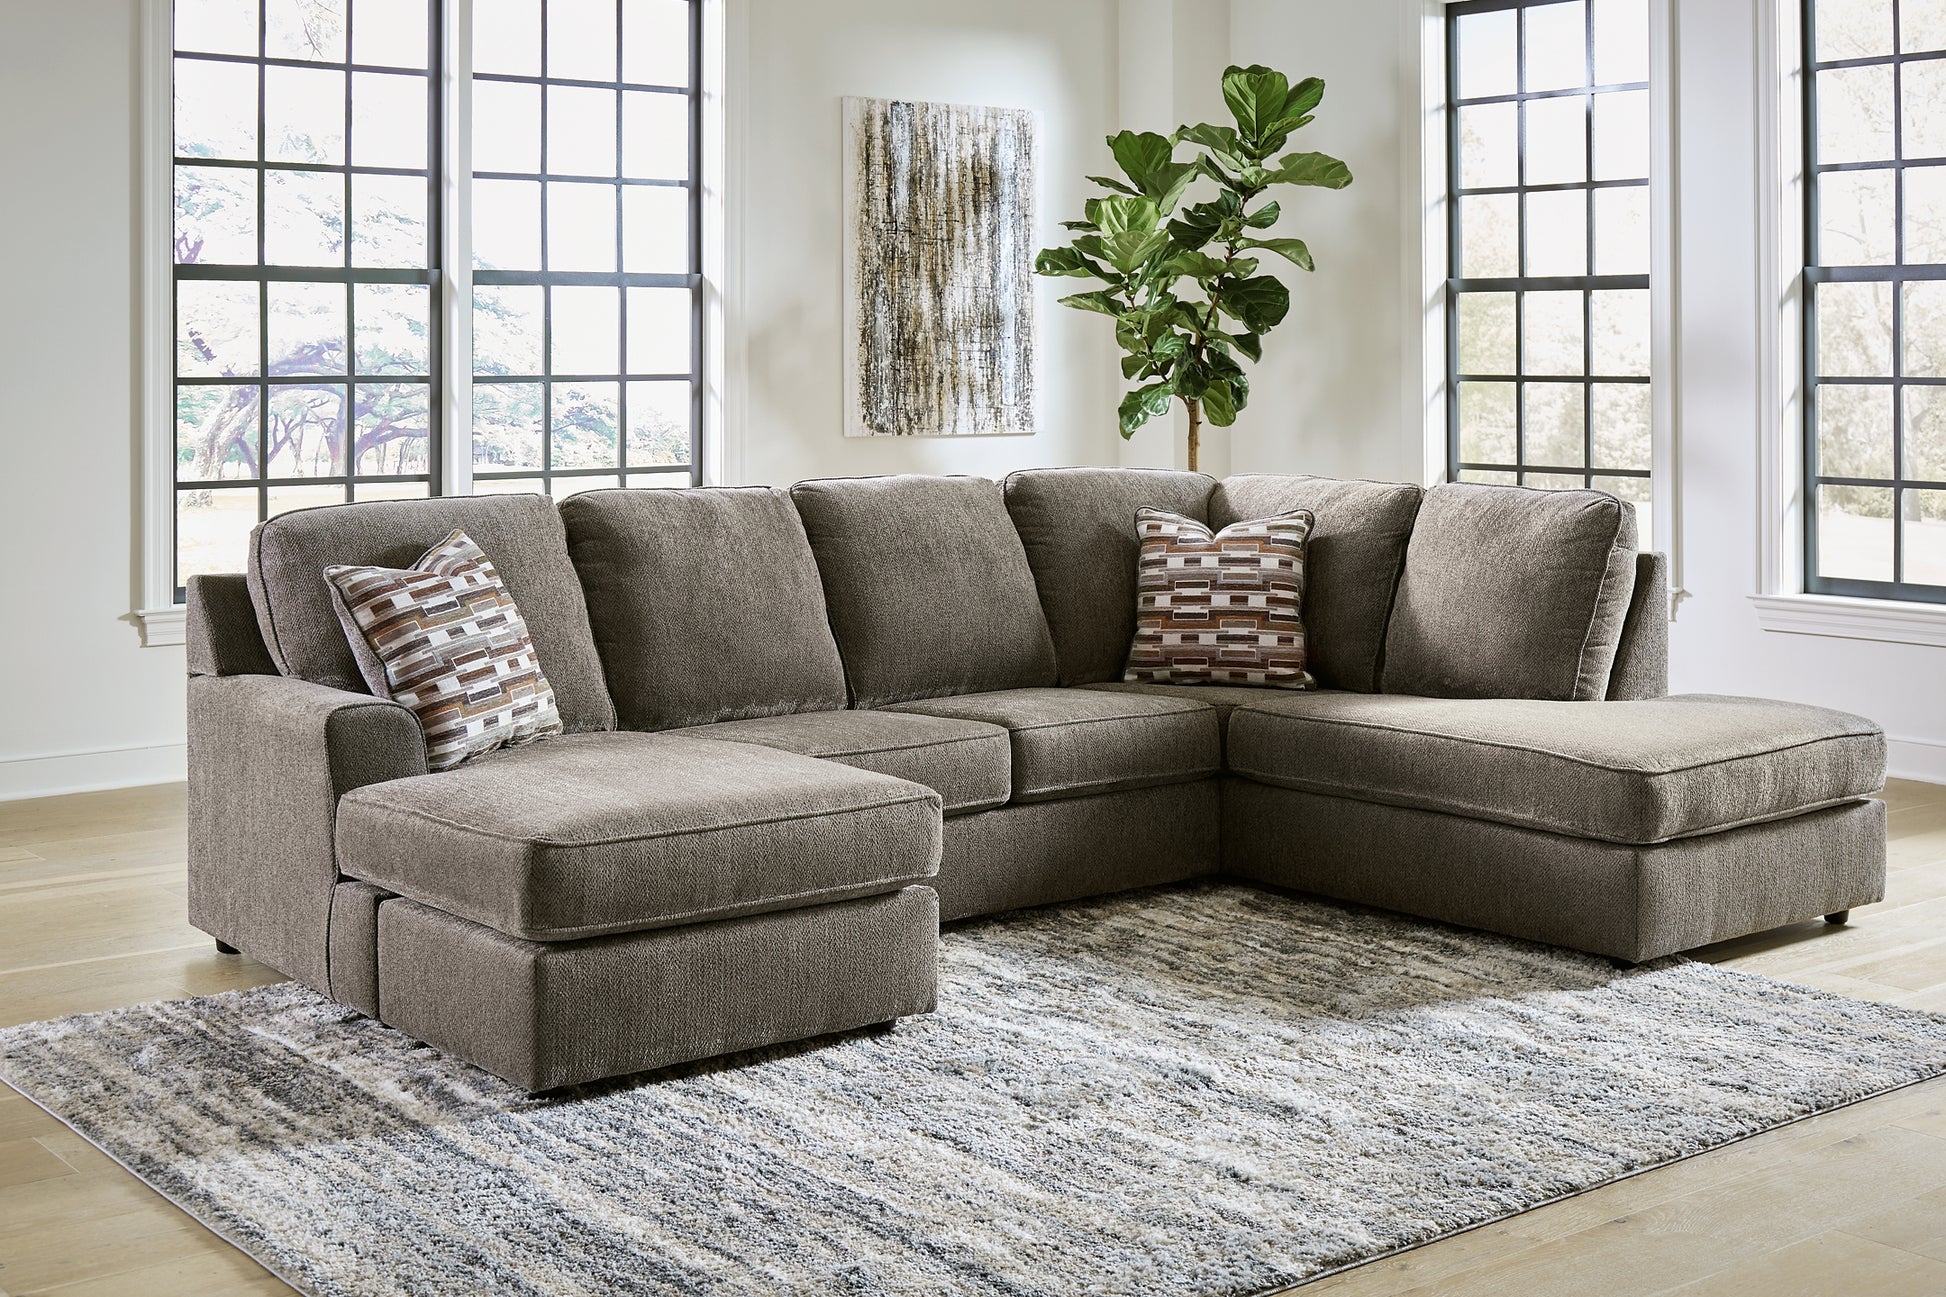 O'Phannon 2-Piece Sectional with Ottoman Wilson Furniture (OH)  in Bridgeport, Ohio. Serving Bridgeport, Yorkville, Bellaire, & Avondale